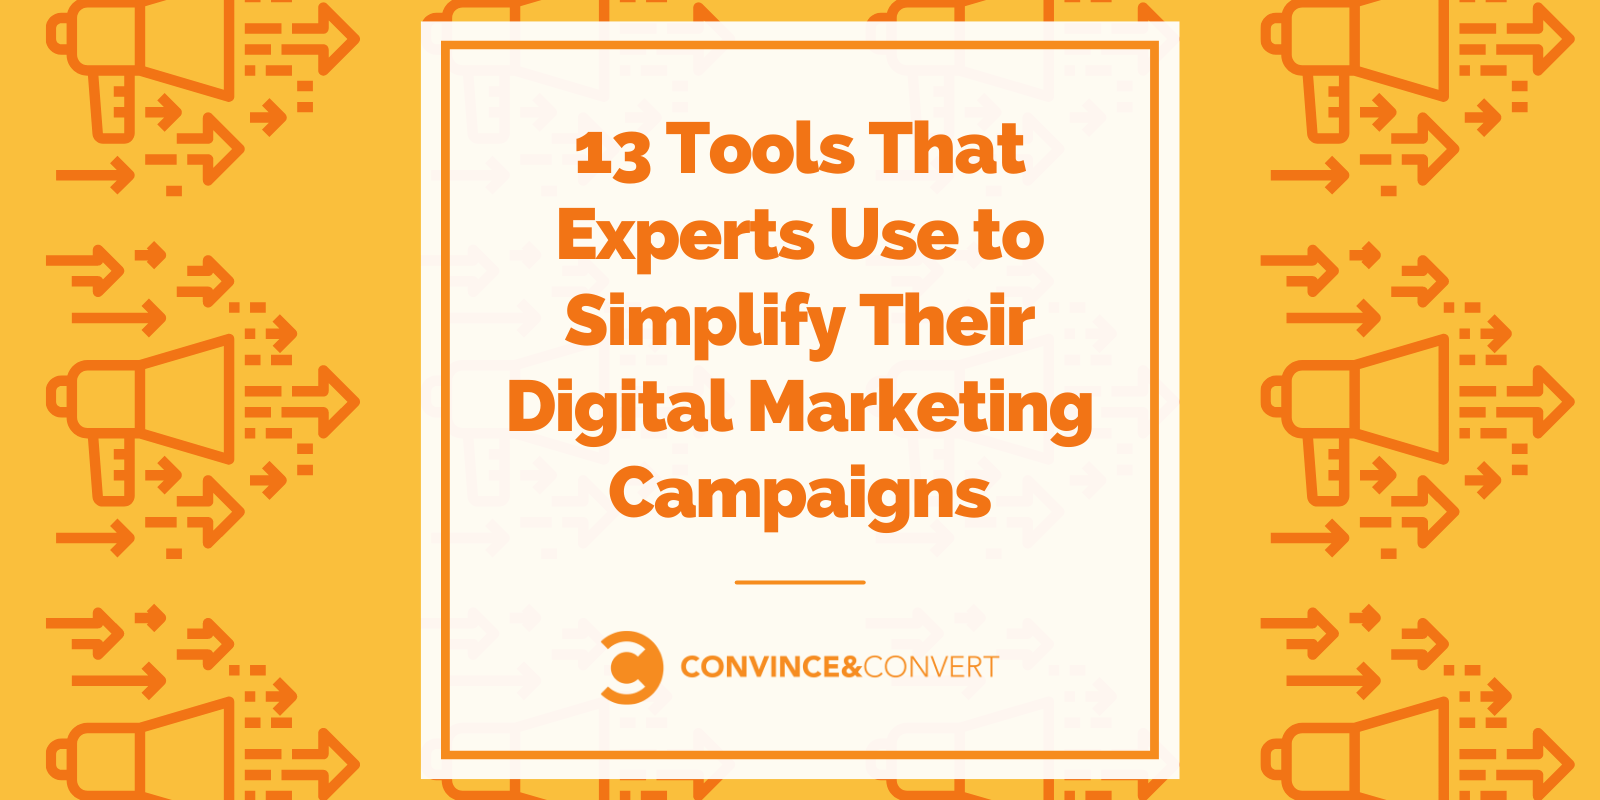 13 Tools That Experts Use to Simplify Their Digital Marketing Campaigns